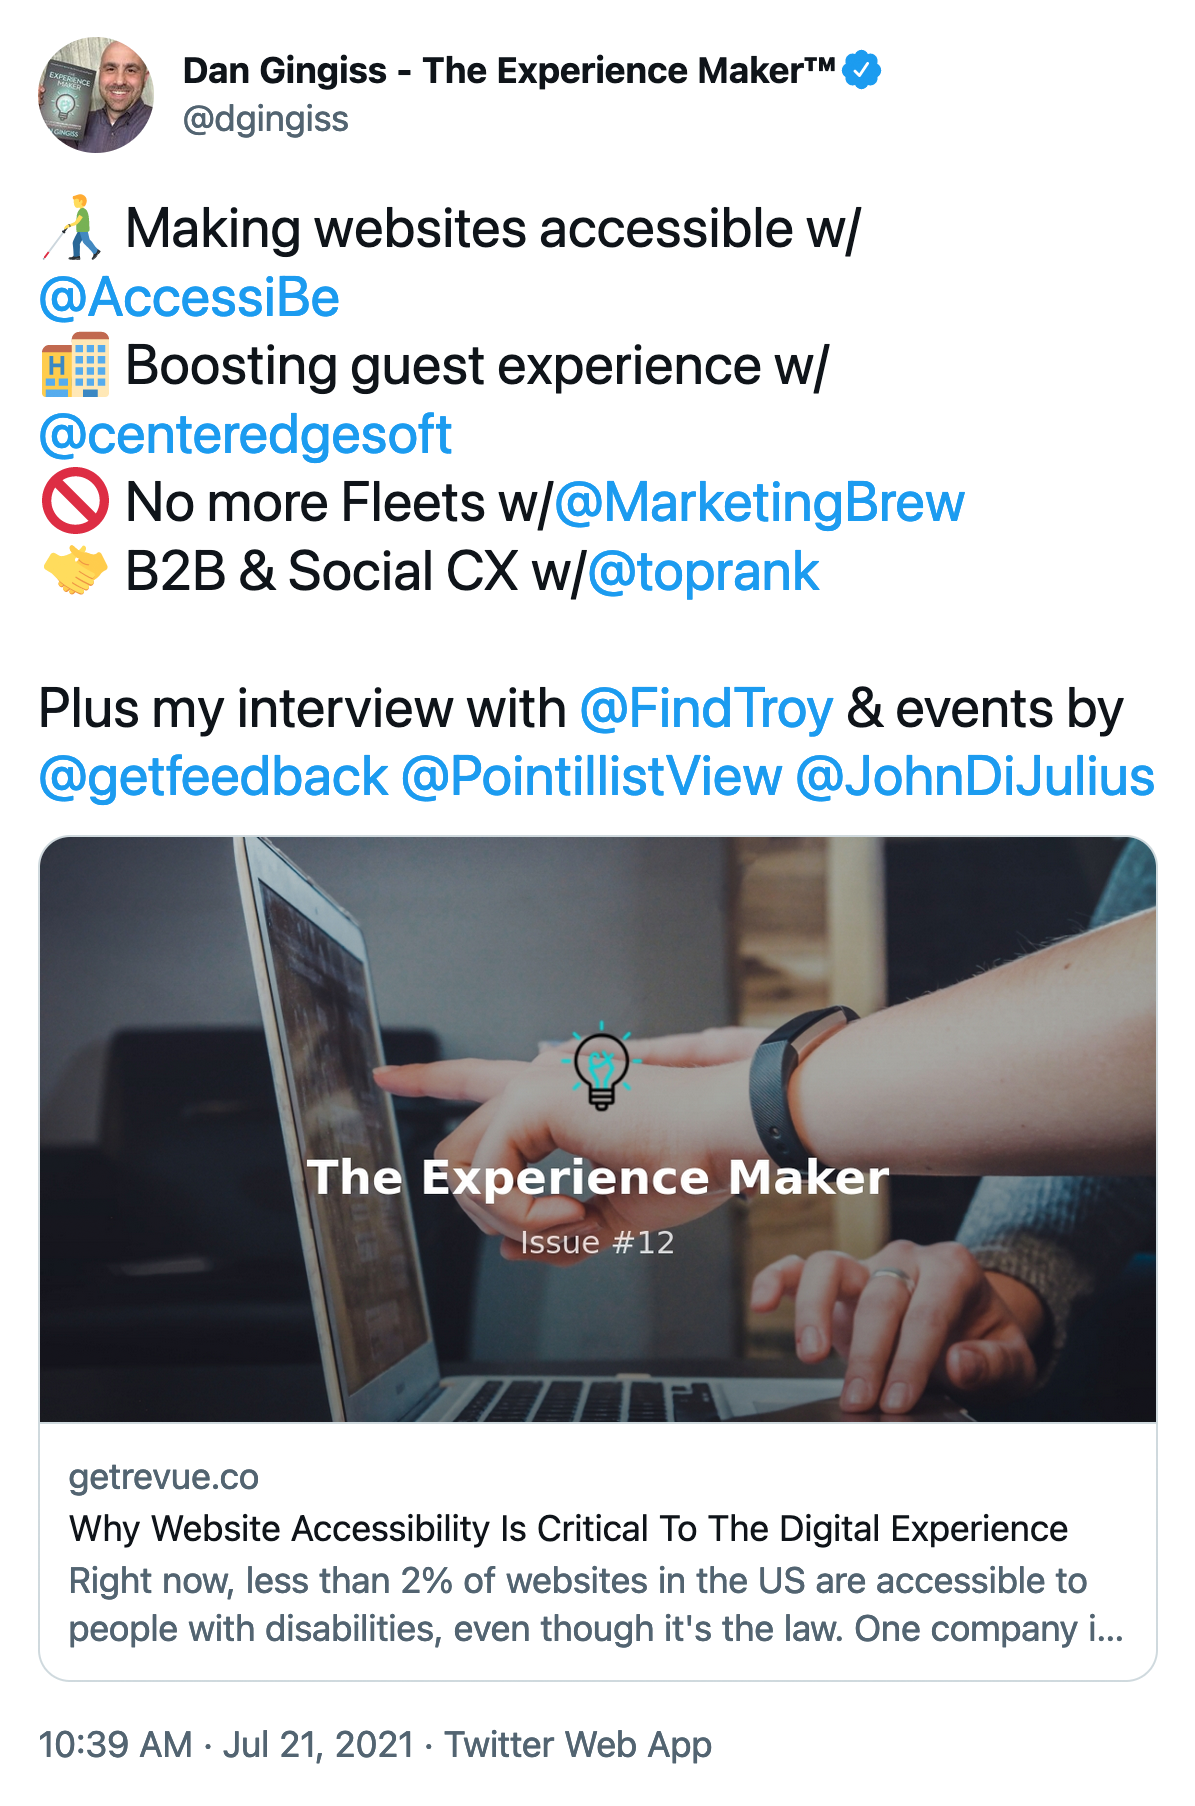 Making websites accessible w/@AccessiBe. Boosting guest experience w/@centeredgesoft. No more Fleets w/@MarketingBrew. B2B & Social CX w/@toprank. Plus my interview with @FindTroy & events by @getfeedback @PointillistView @JohnDiJulius. Screenshot of a tweet by Dan Gingiss, posted to Twitter on July 21st, 2021 via the Twitter Web App.